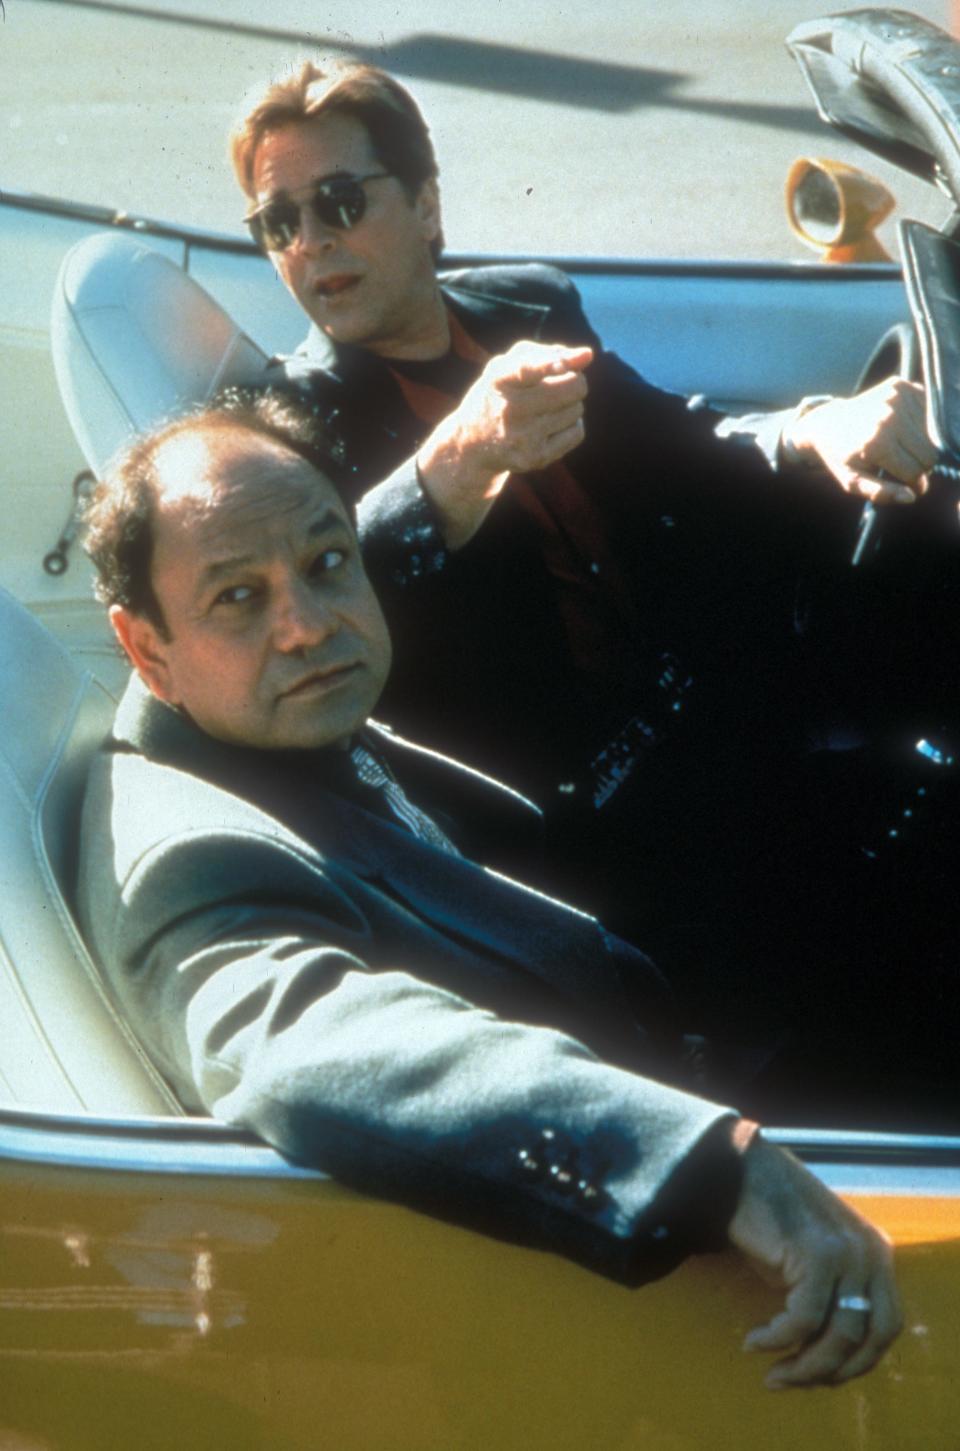 Cheech Marin is being driven around by Don Johnson in "Nash Bridges." Marin is going to give the keynote address this weekend at the "HighLifeStyleShow" this weekend in Boxborough.